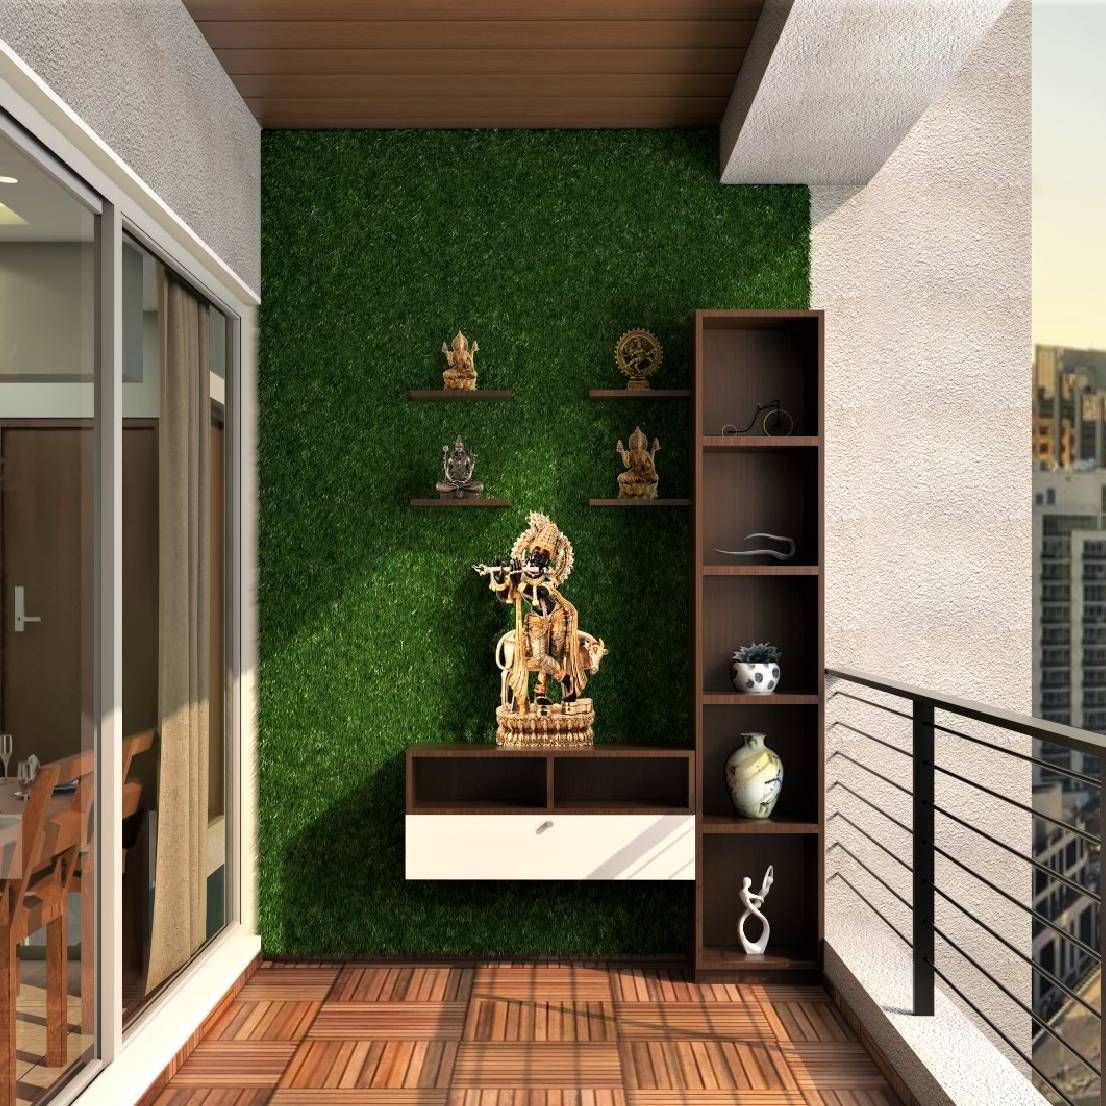 Modern Balcony Design With Turf Grass Wall And Wooden Unit